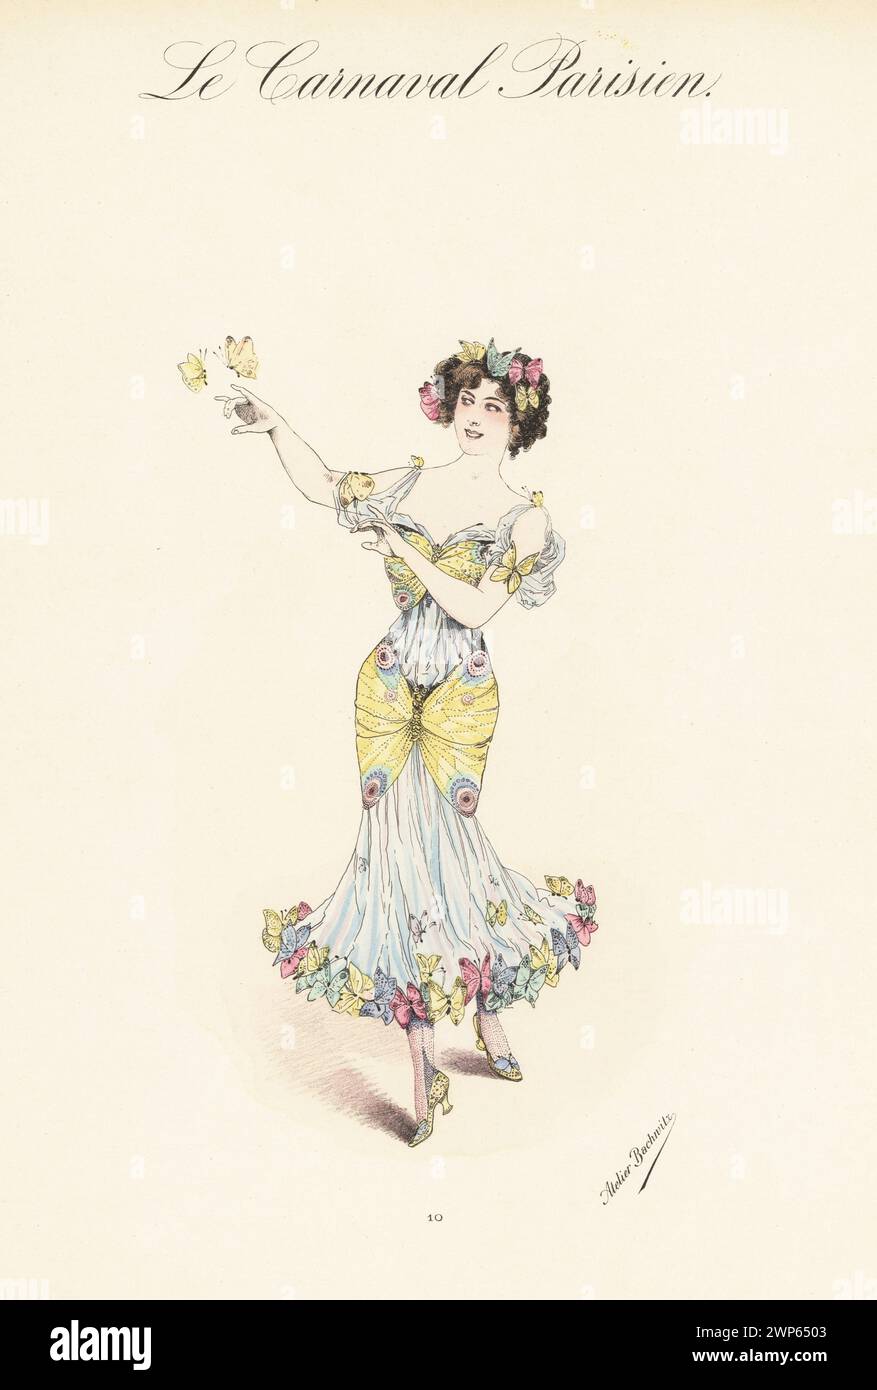 Woman in fancy-dress costume as a Butterfly. In blue gown with large yellow butterfly wing panels on the bust and hip, butterflies at the hem. She is playing with several butterflies flying near her. Handcoloured lithograph by Atelier Bachwitz from Le Carnaval Parisien (Parisian Carnival), Atelier Bachwitz AG, Vienna, 1925. Stock Photo